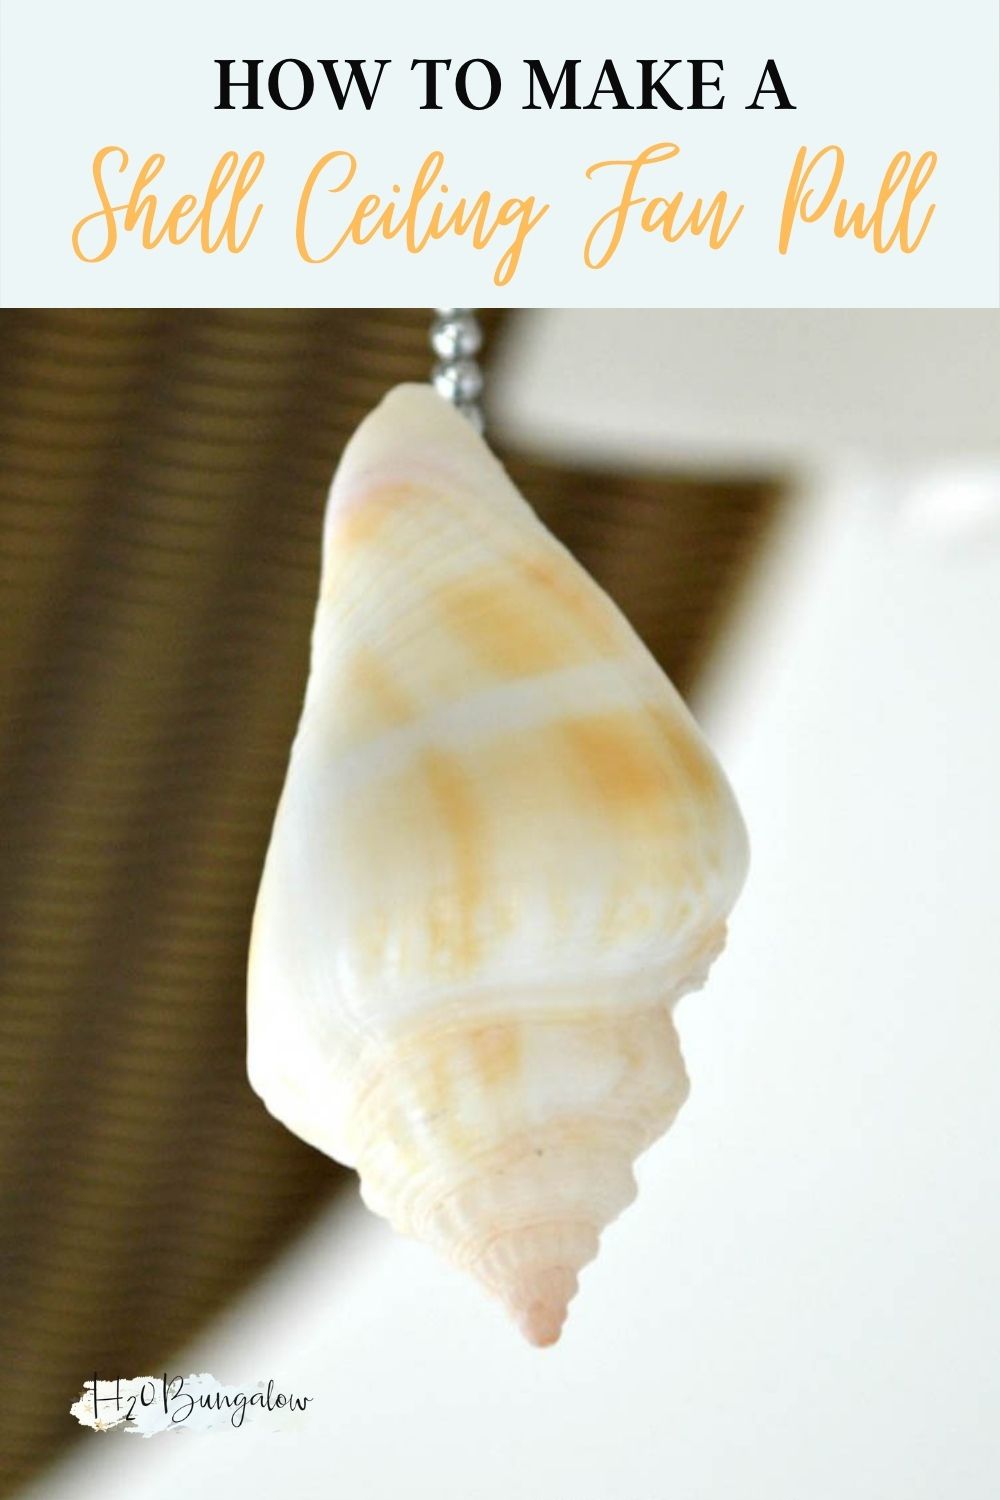 close up of DIY shell ceiling fan pull with text overlay